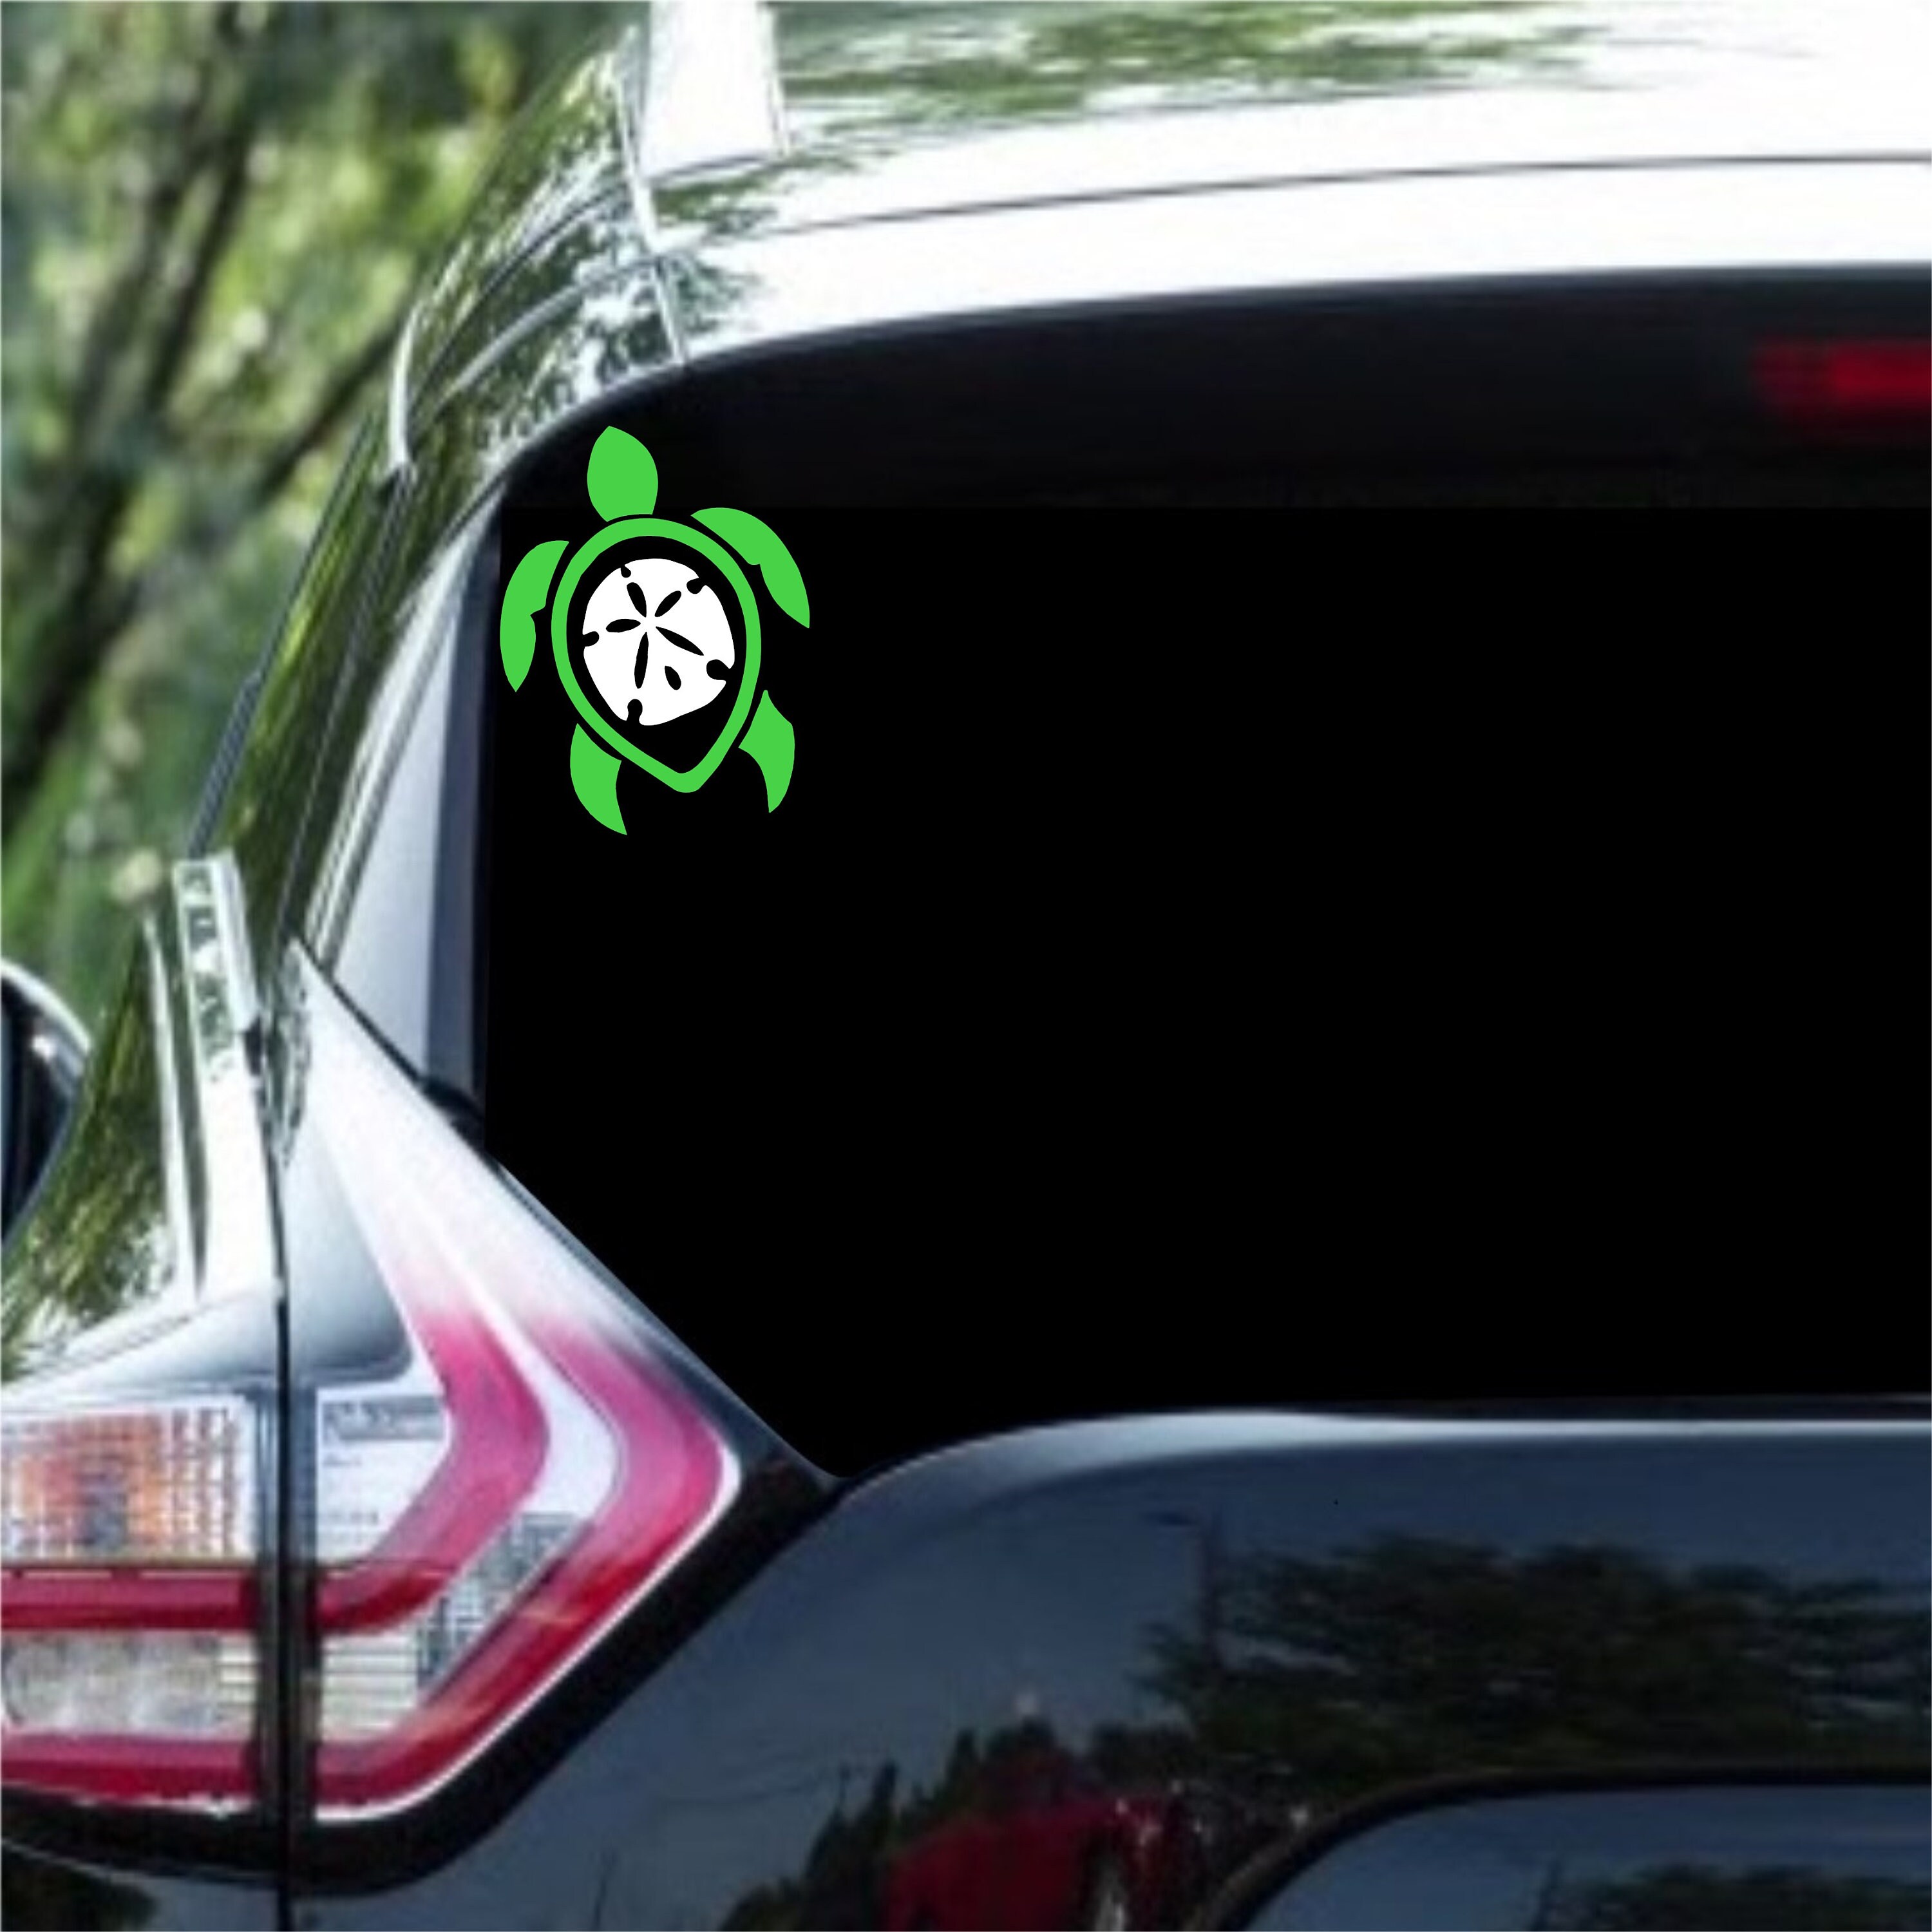  Decal Stickers of Turtle Silhouettes 1 (Black) (Set of 2)  Premium Waterproof Vinyl Decal Stickers for Laptop Phone Accessory Helmet  Car Window Mug Tuber Cup Door Wall Decoration - ANDstic078223BL 